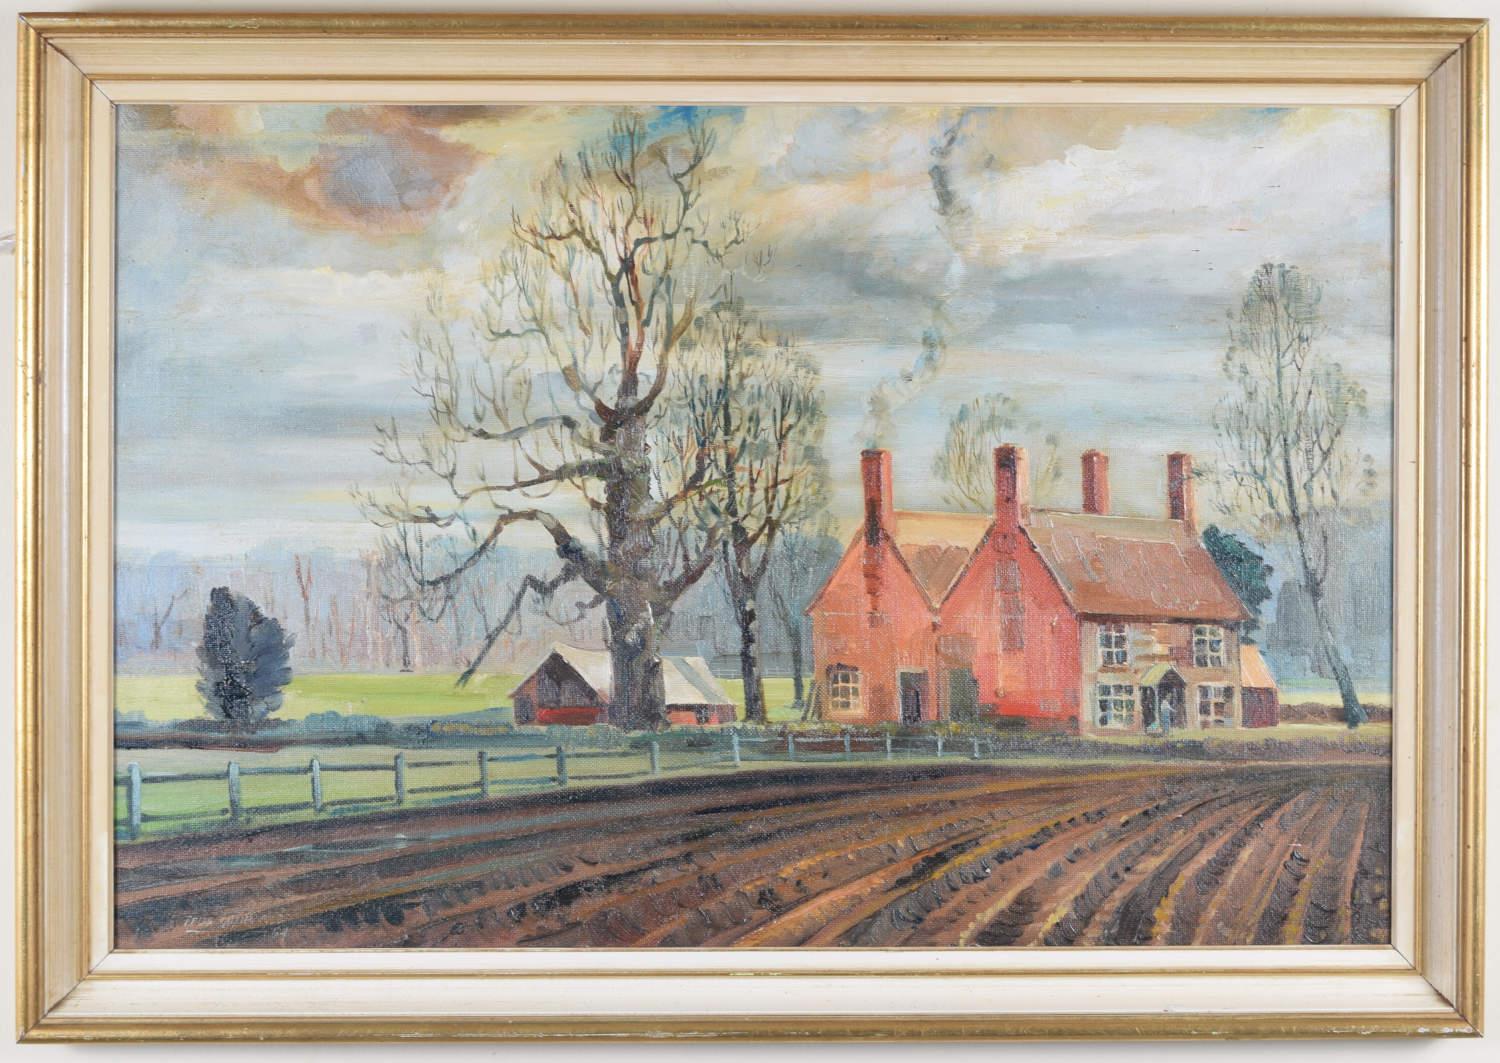 To see our other Modern British Art, scroll down to "More from this Seller" and below it click on "See all from this Seller" - or send us a message if you cannot find the artist you want.

Ralph Gillies Cole (1915-1994)
Farmhouse by Lane
Oil on